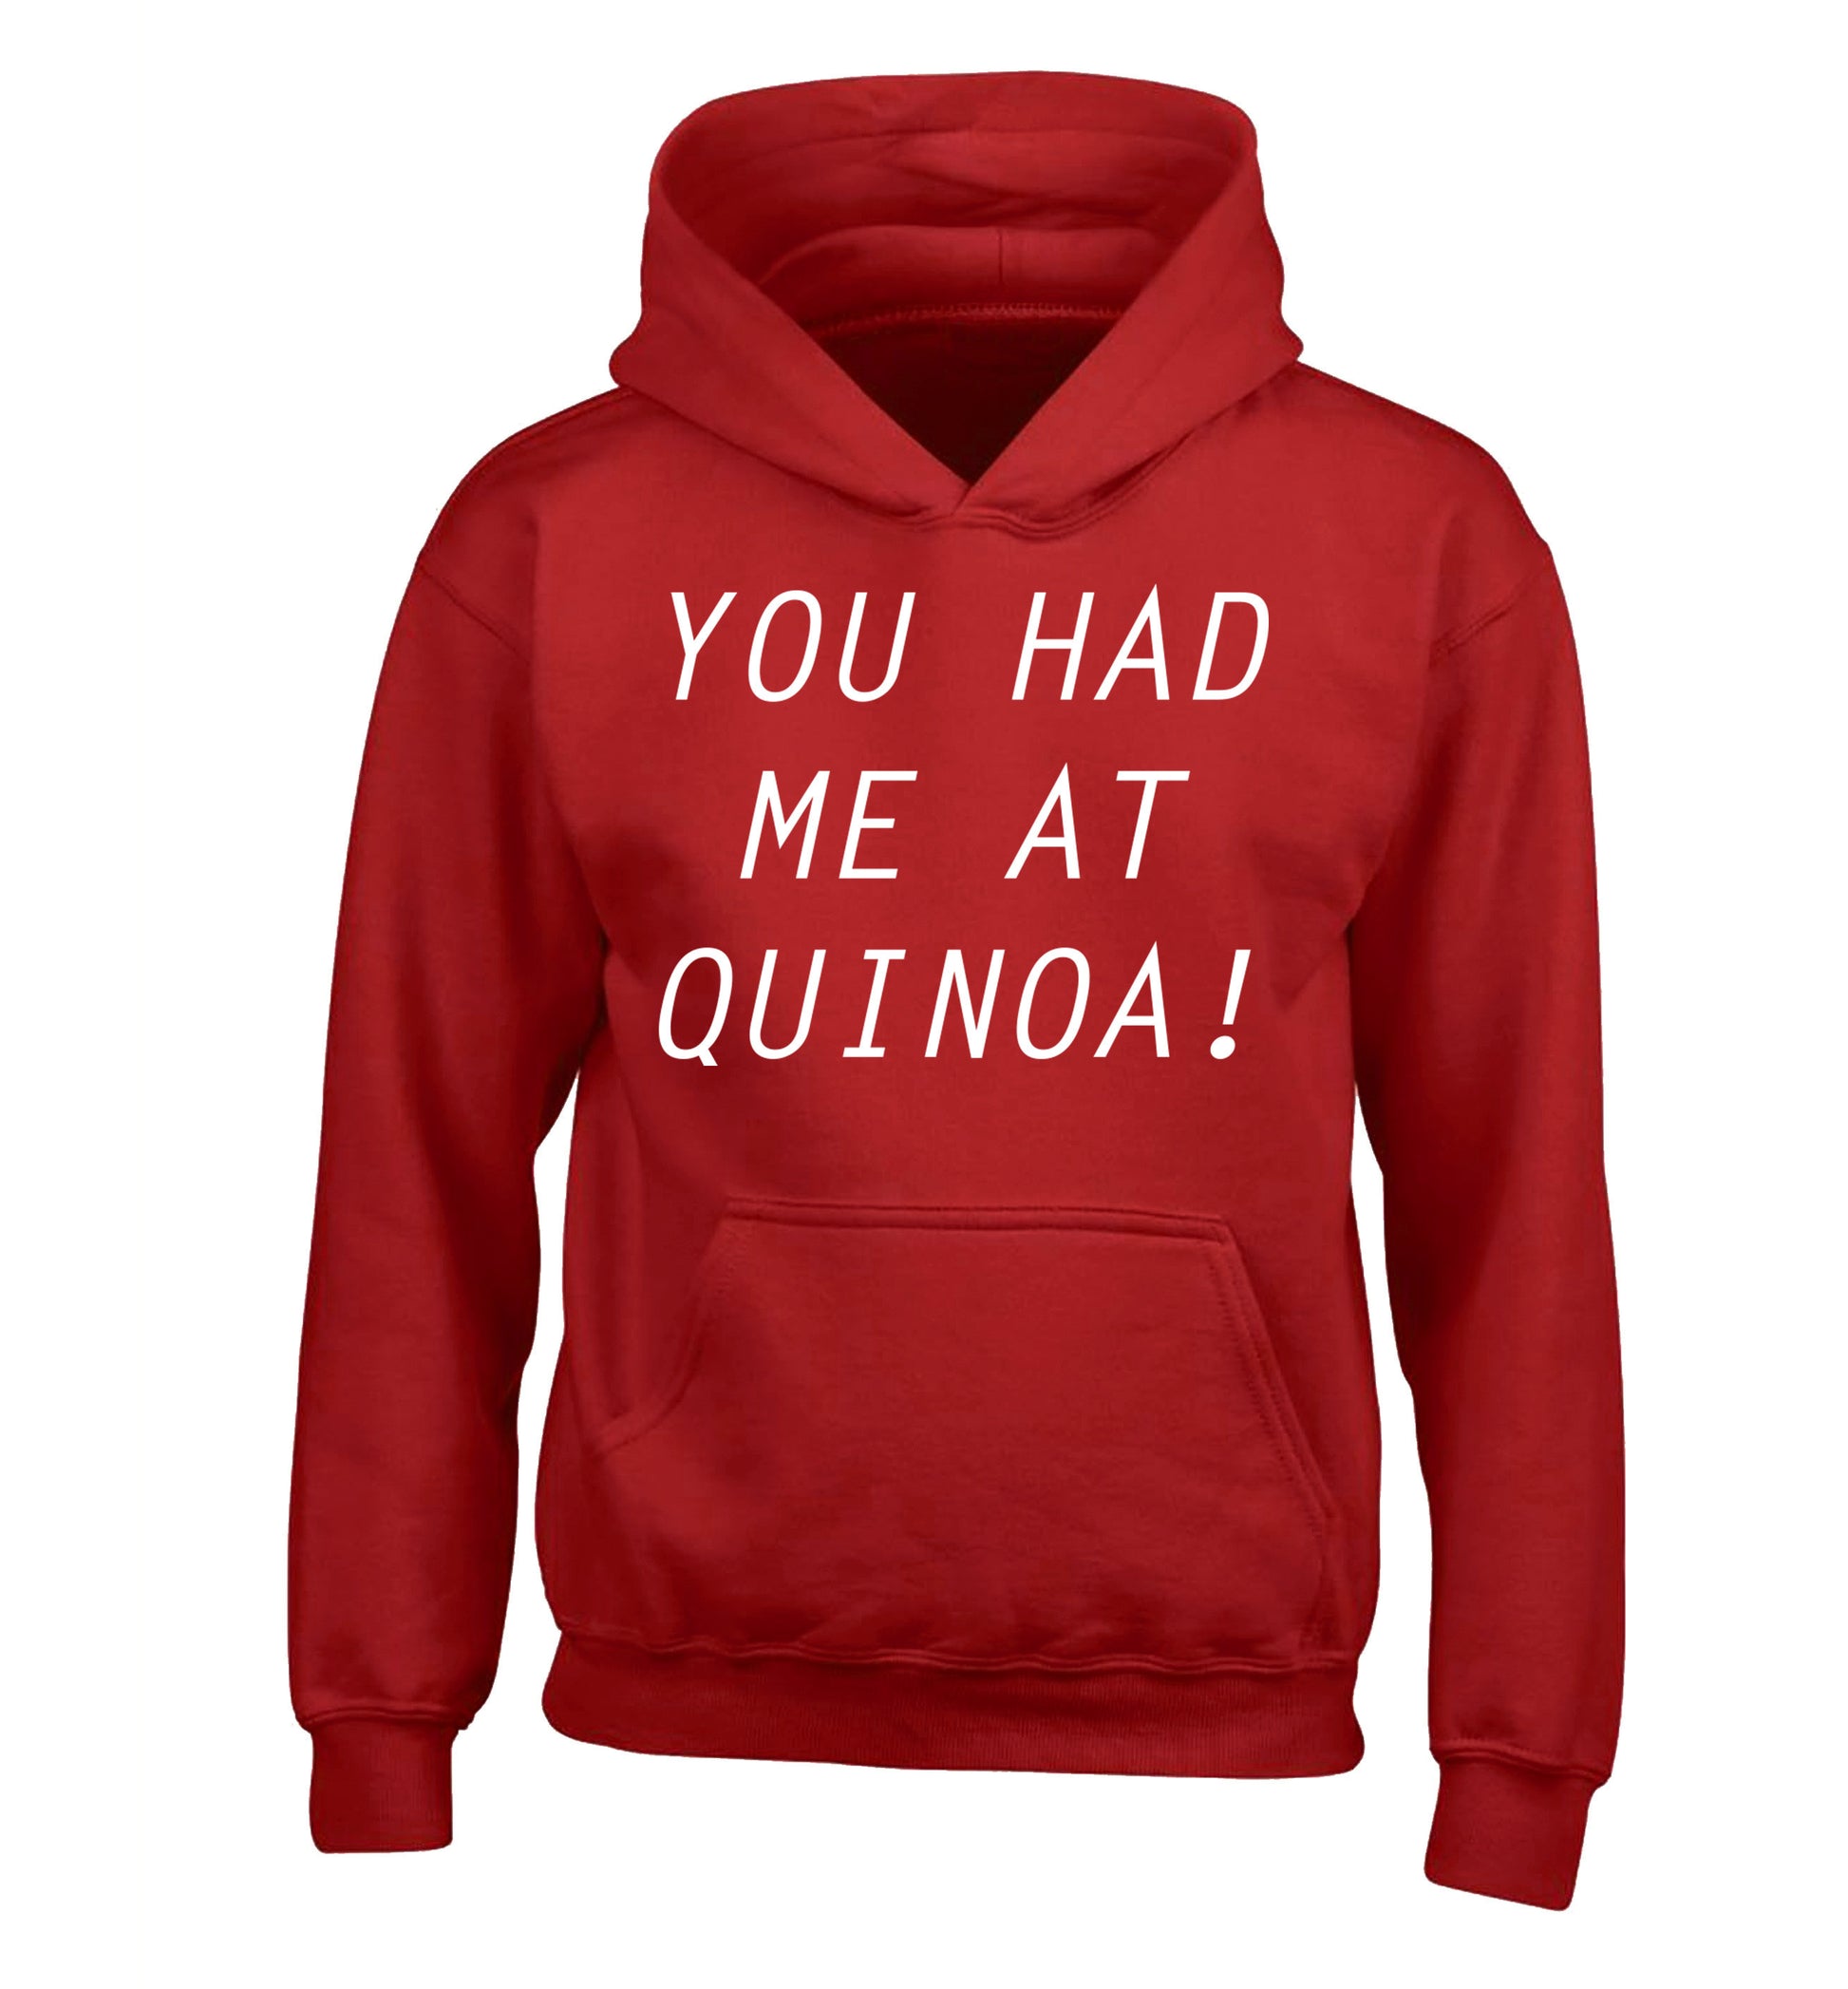 You had me at quinoa children's red hoodie 12-14 Years